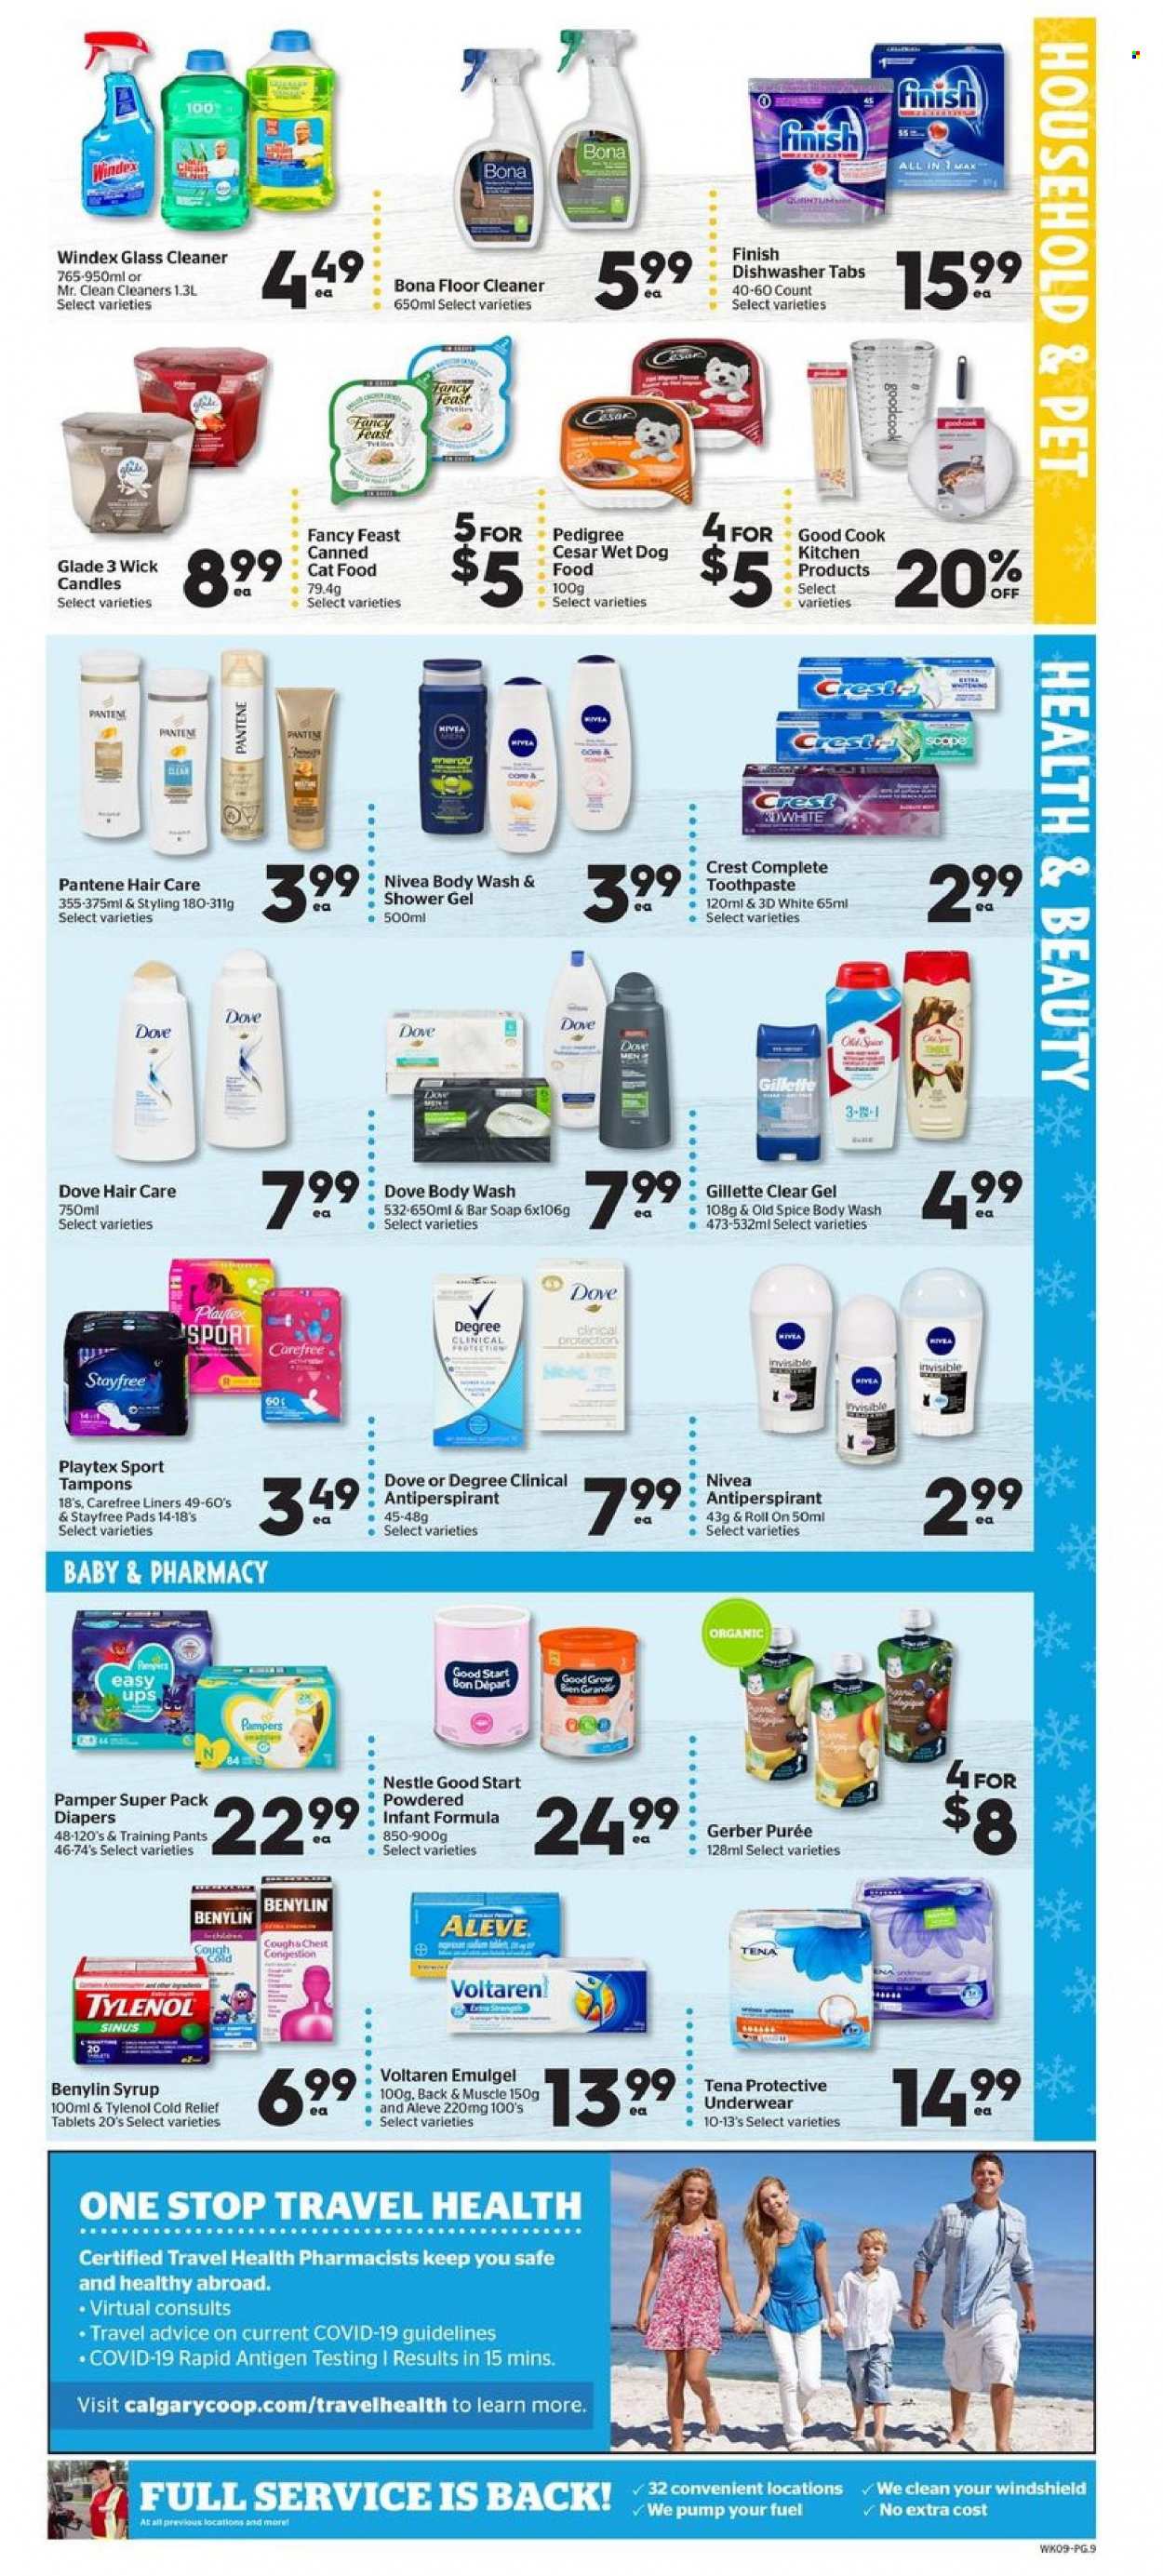 thumbnail - Calgary Co-op Flyer - January 03, 2022 - January 12, 2022 - Sales products - Gerber, spice, syrup, pants, nappies, baby pants, Windex, cleaner, floor cleaner, glass cleaner, body wash, shower gel, soap bar, soap, toothpaste, Crest, Stayfree, Playtex, Carefree, tampons, anti-perspirant, roll-on, Aleve, Tylenol, Benylin, Nestlé, Dove, Gillette, Pampers, Pantene, Nivea, Old Spice. Page 10.